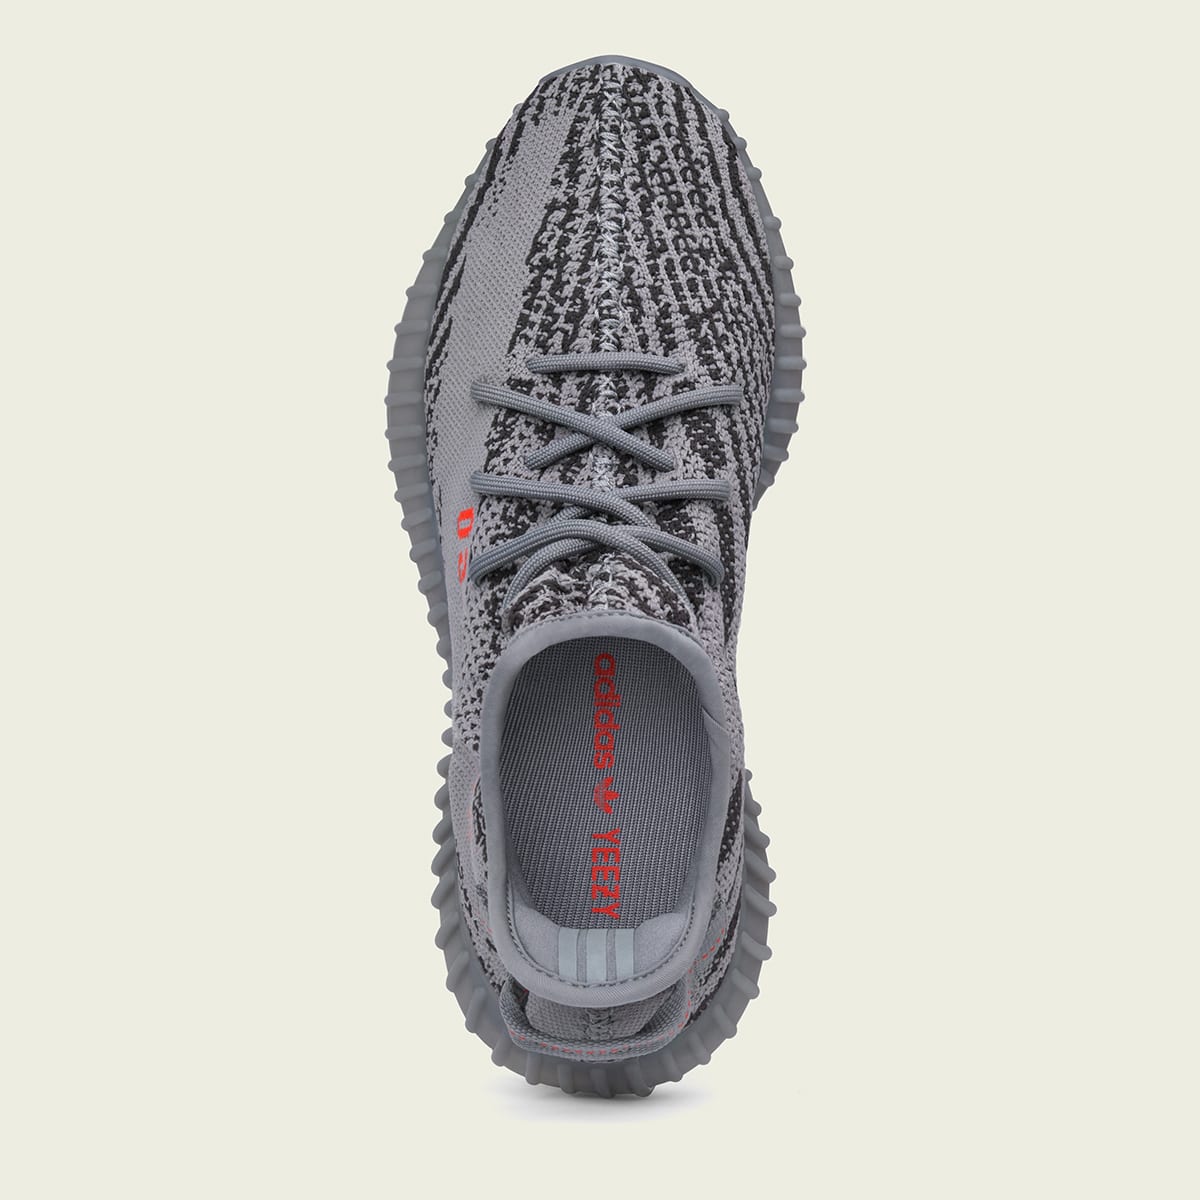 Troublesome efficiently cubic Adidas Yeezy Boost 350 V2 (Grey, Bold Orange & Grey) | END. Launches